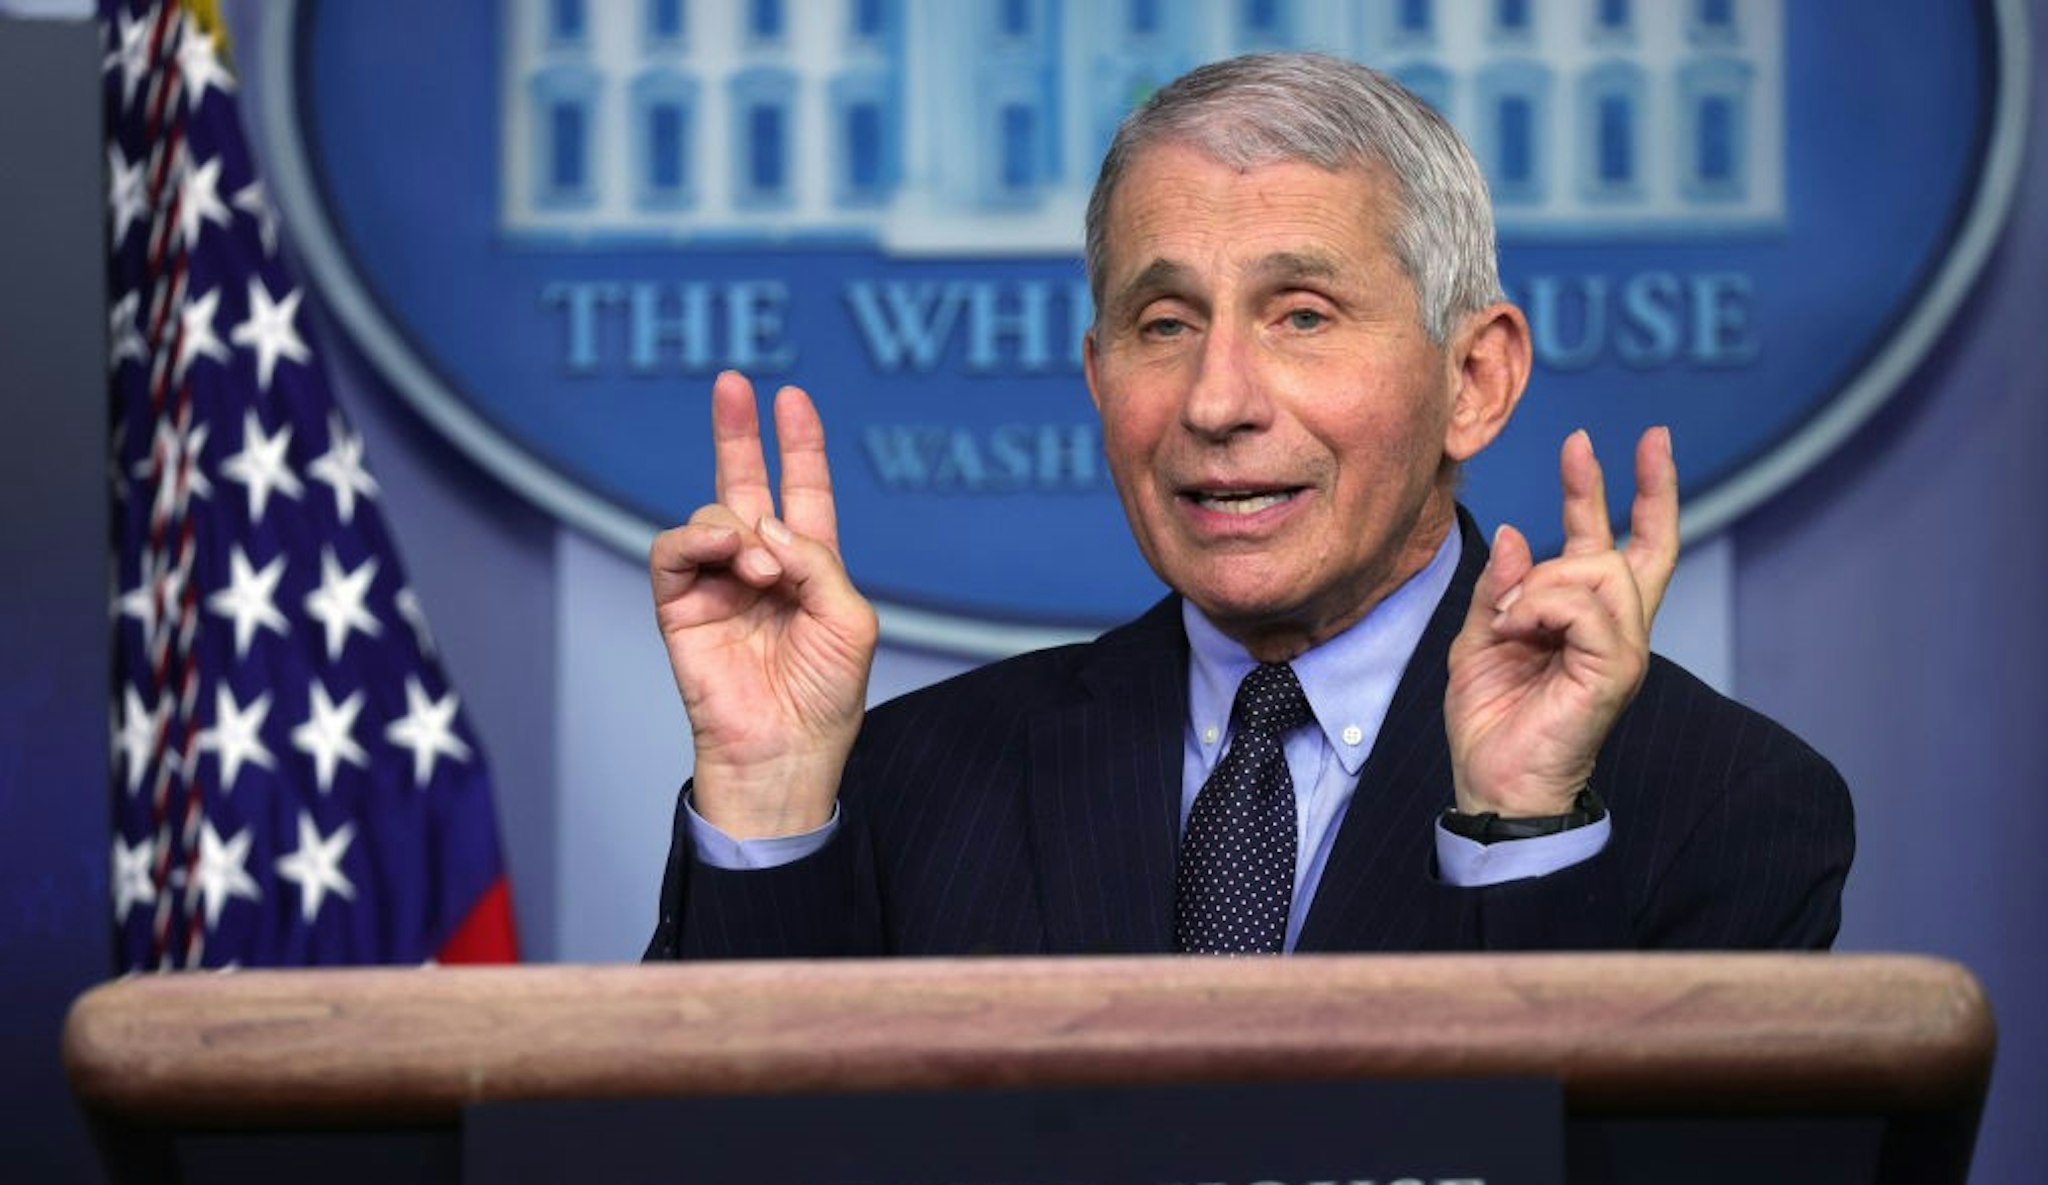 WASHINGTON, DC - JANUARY 21: Dr Anthony Fauci, Director of the National Institute of Allergy and Infectious Diseases, speaks during a White House press briefing, conducted by White House Press Secretary Jen Psaki, at the James Brady Press Briefing Room of the White House January 21, 2021 in Washington, DC. Psaki held her second press briefing since President Joe Biden took office yesterday. (Photo by